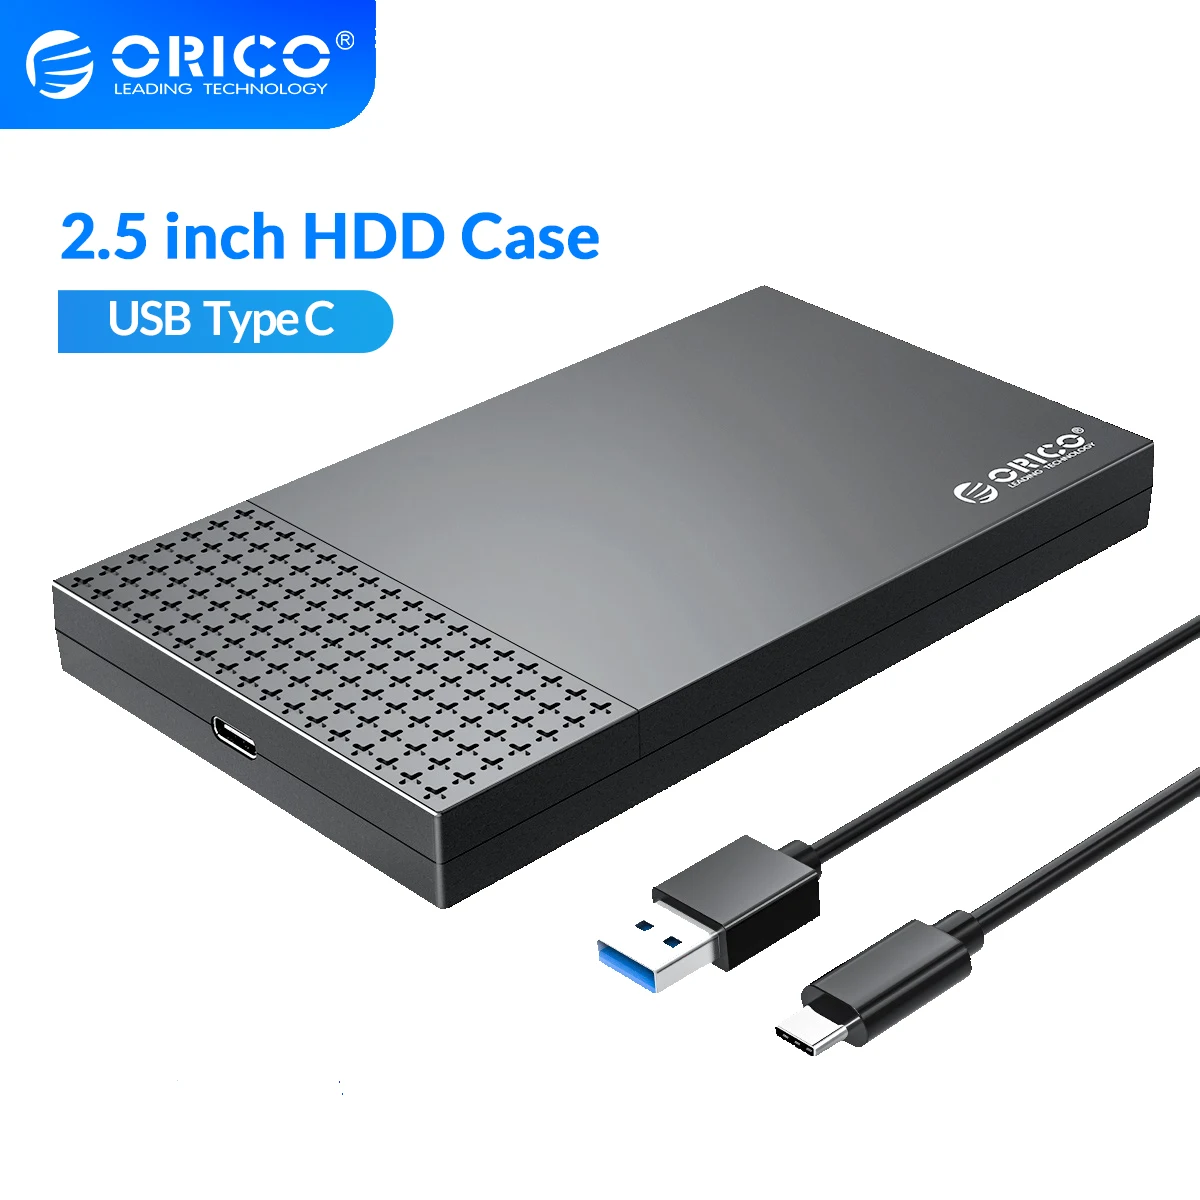 ORICO 2.5 inch HDD Case Type C External Hard Drive Case SATA to USB 3.1 HDD Enclosure Box for SATA HDD SSD Case Support UASP ugreen 2 5 inch hdd ssd case usb c to sata iii hdd enclosure caddy portable case for external hard drive ssd case support 10tb